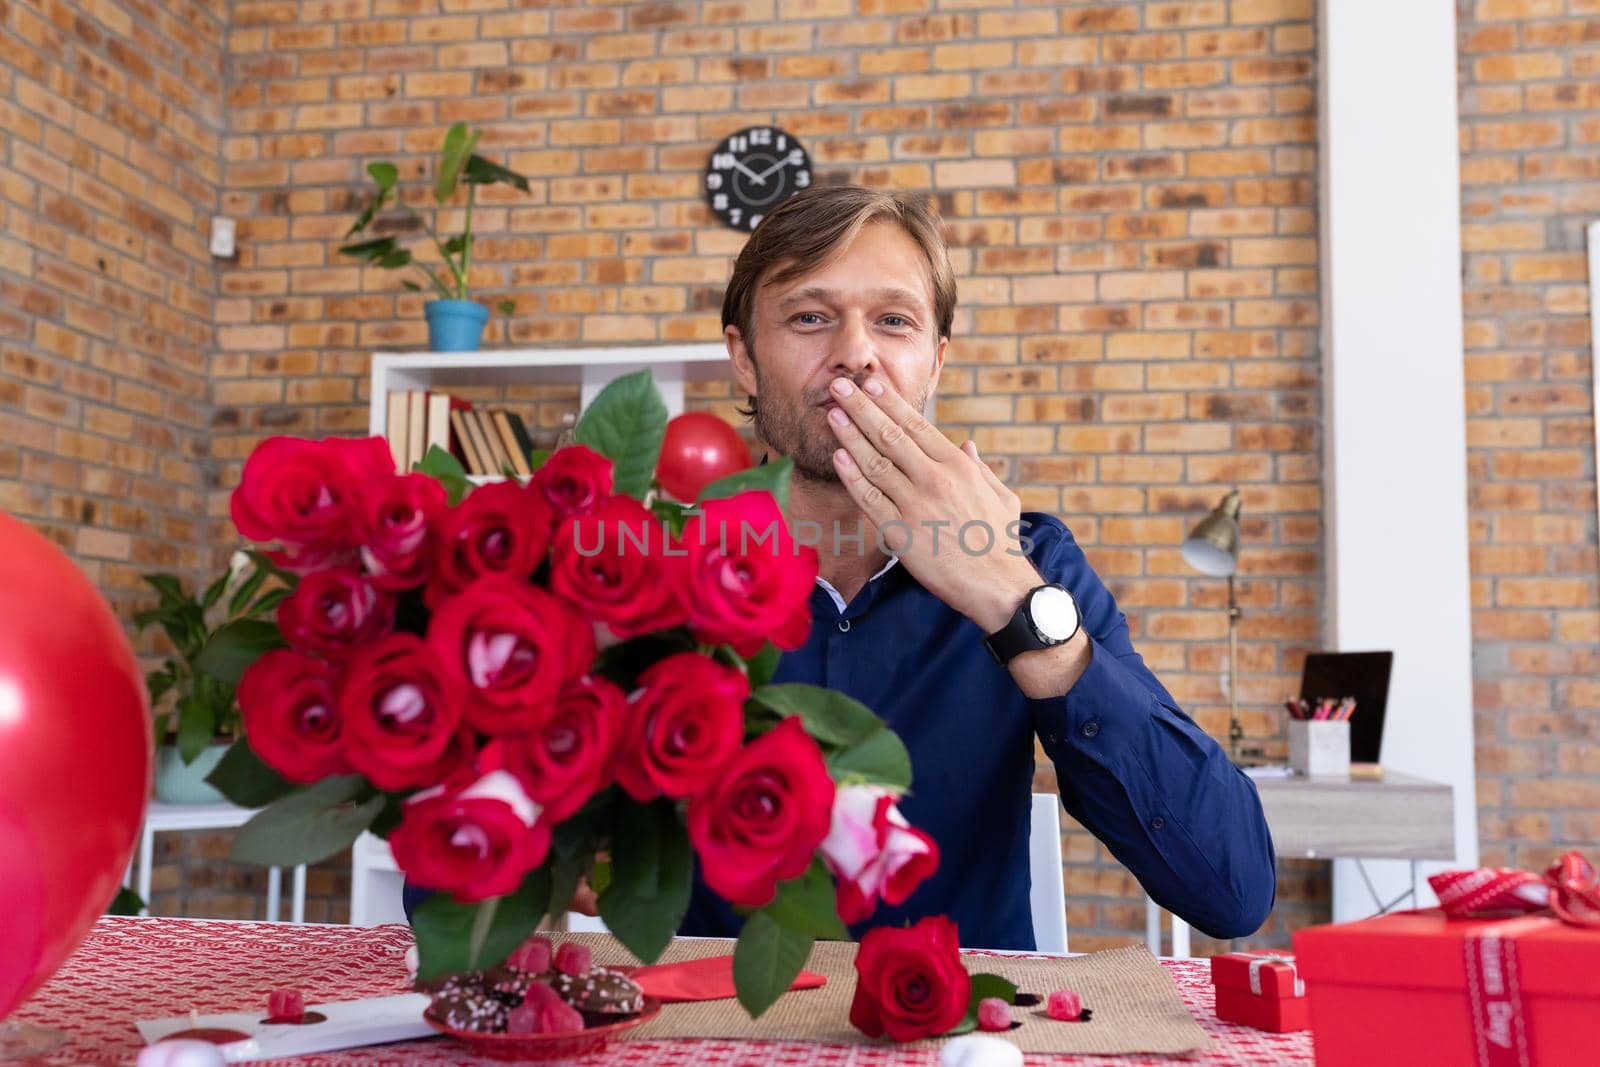 Caucasian man making video call holding bunch of red roses and blowing a kiss by Wavebreakmedia